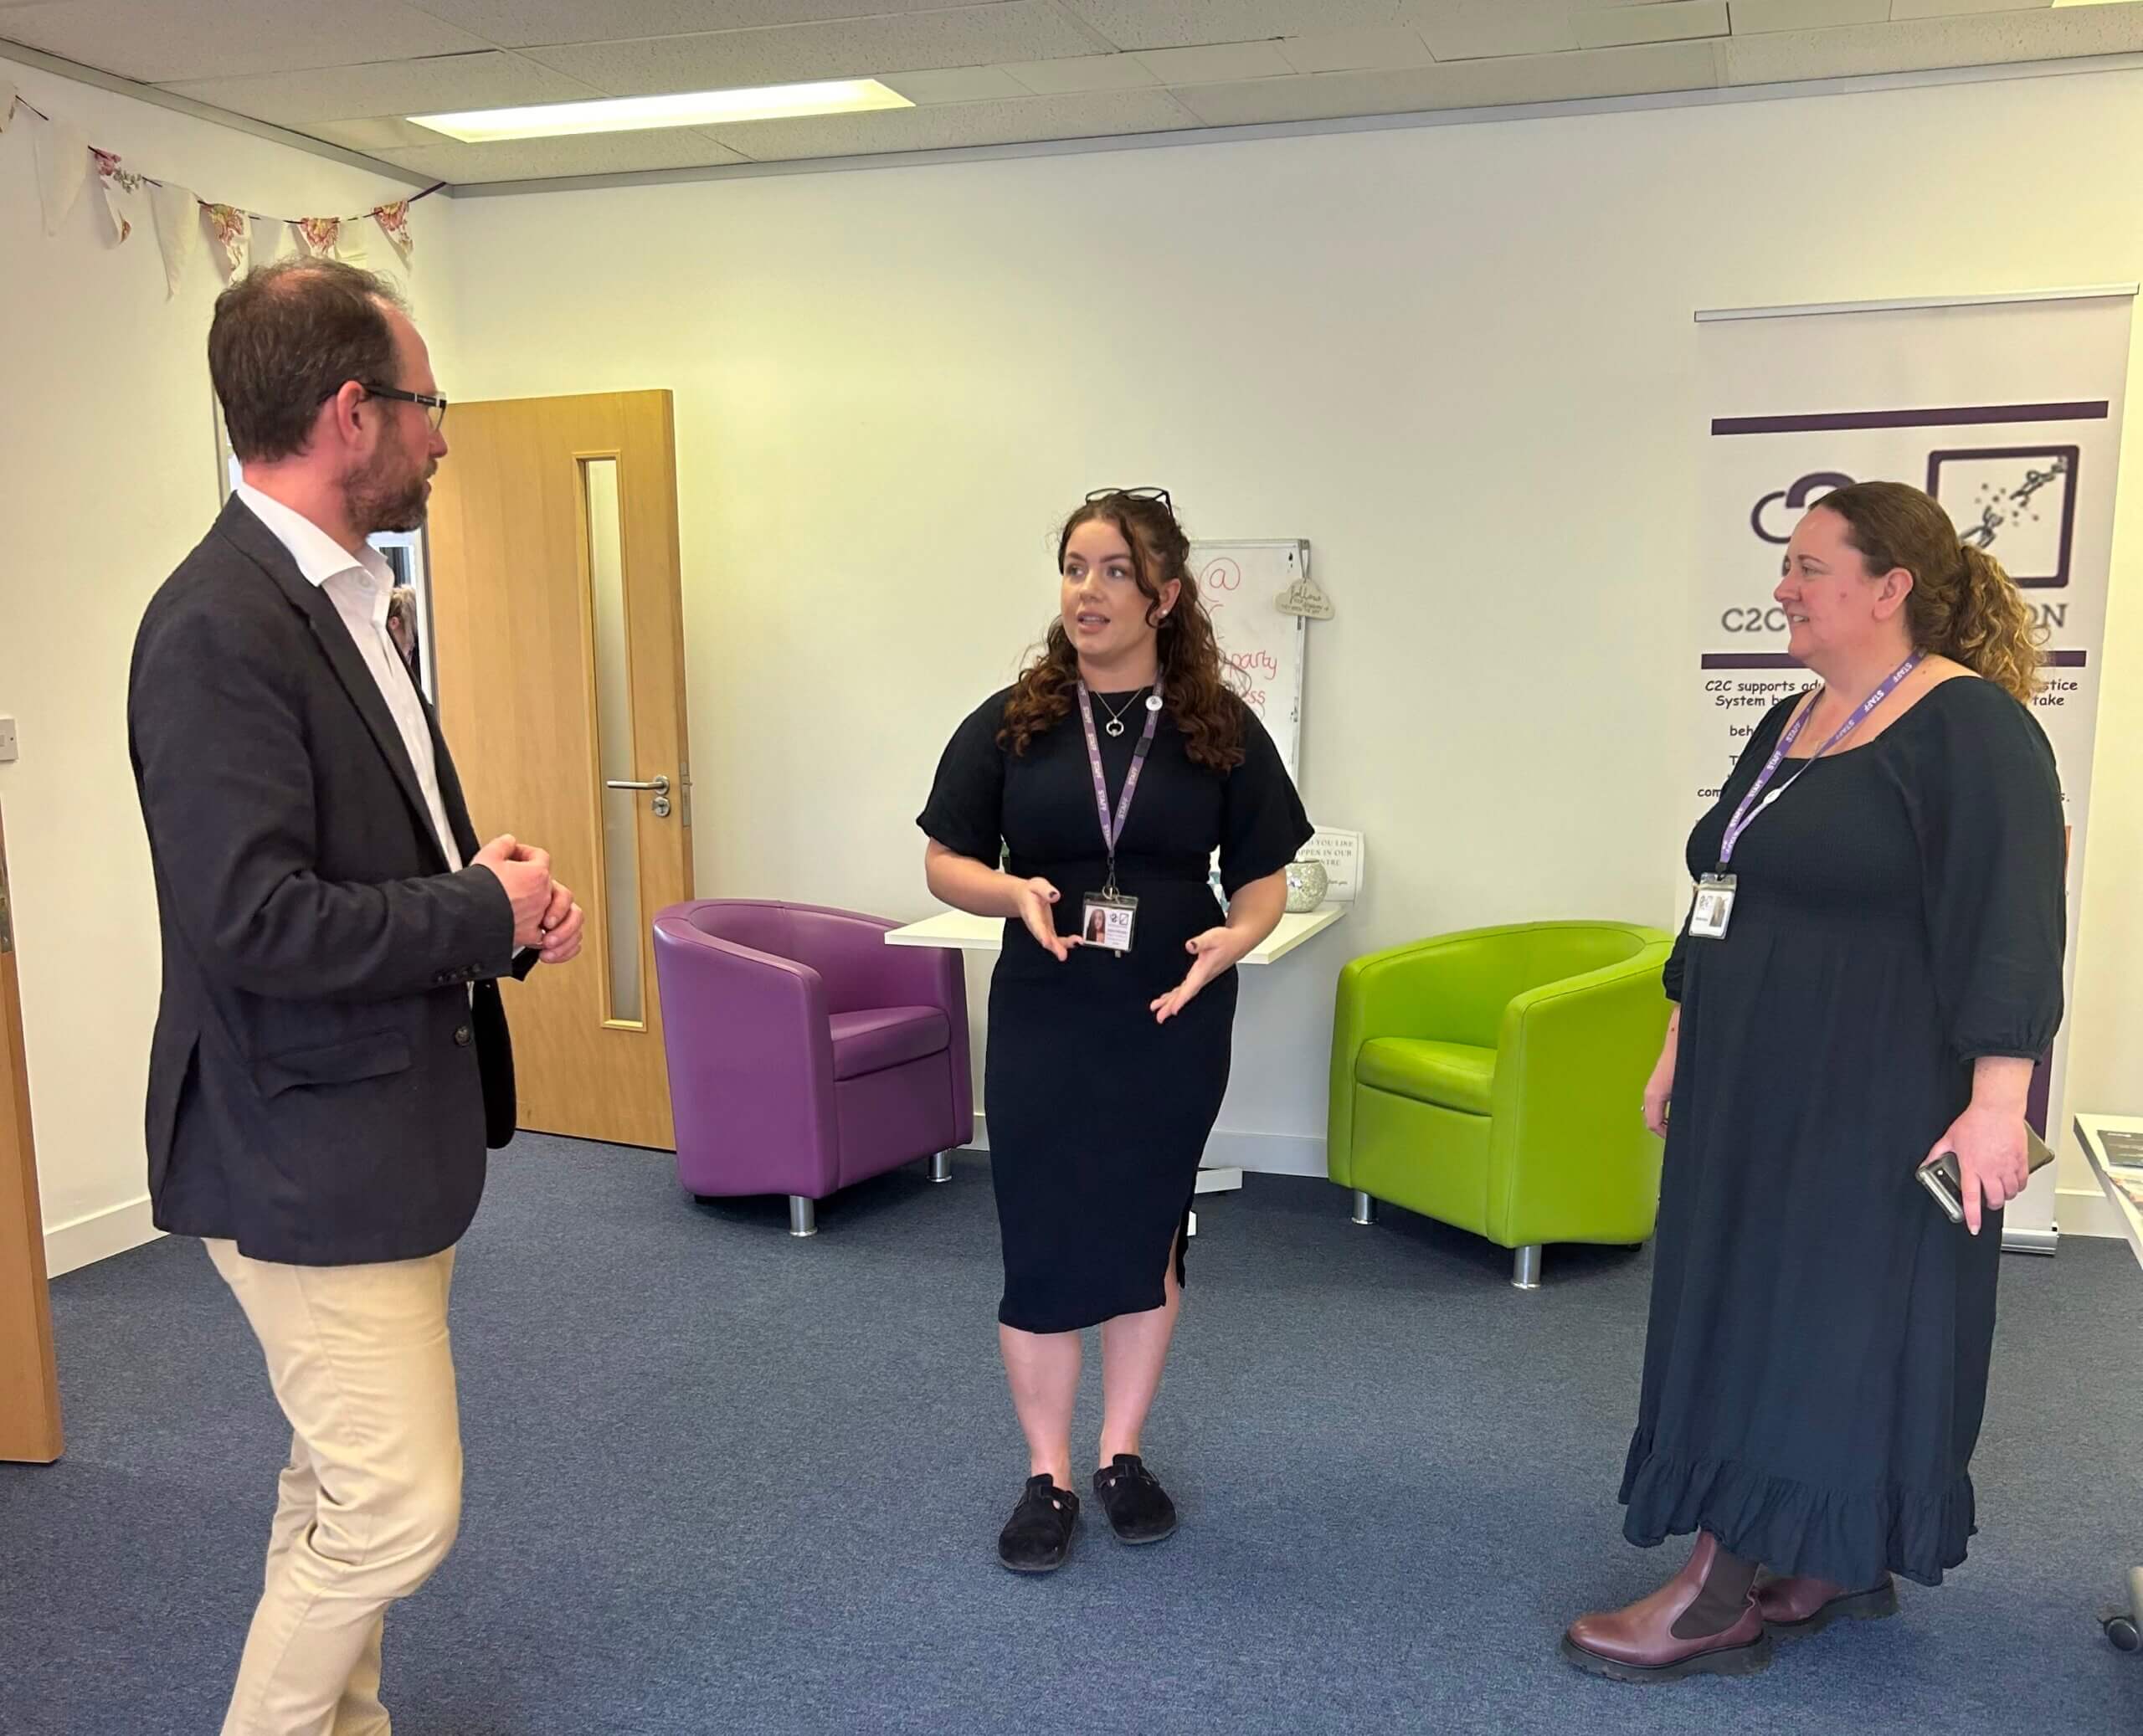 Matthew Barber (left) with Jessica Morrison, Women’s Lead and Engagement Coordinator at C2C Social Action, (centre) and Michelle Shaw, CEO of C2C Social Action, (right)